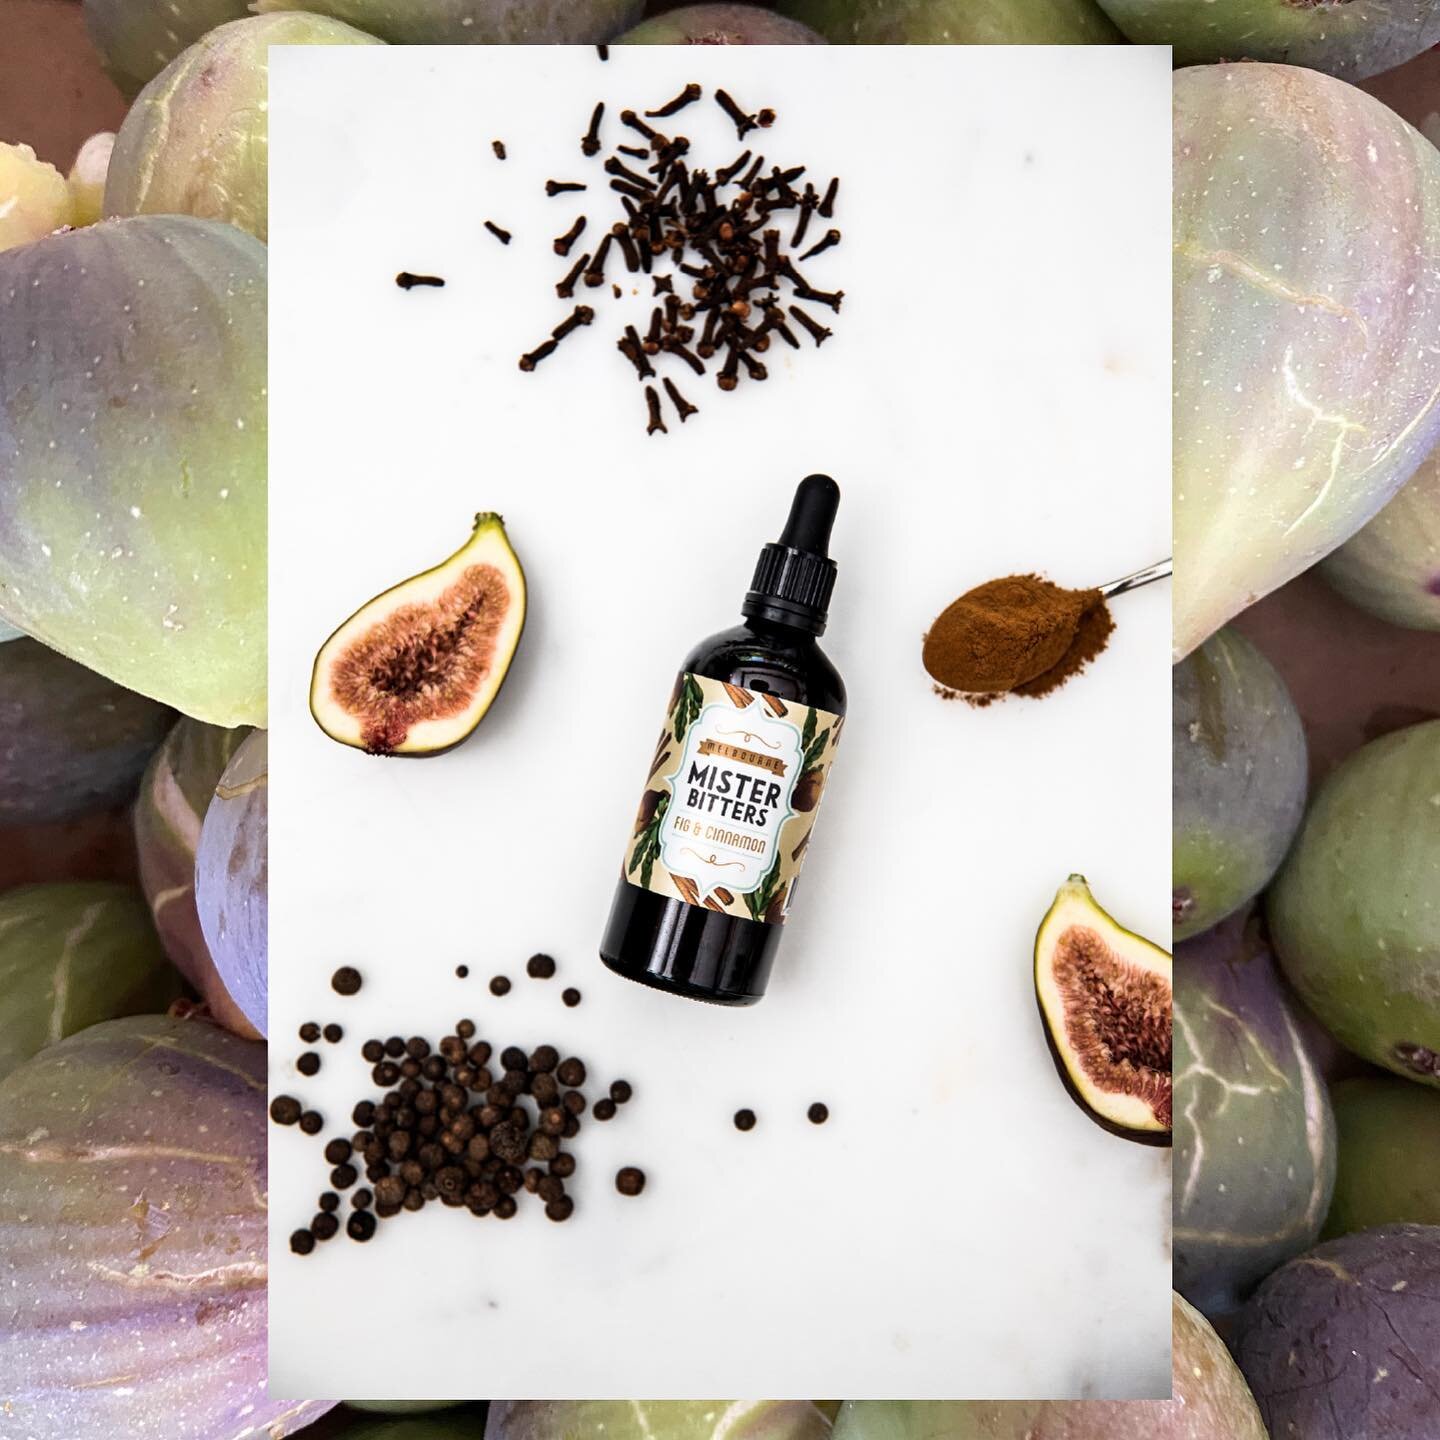 Spicy, jammy, bold.

Our Fig &amp; Cinnamon Bitters is a true essential to any cocktail bar-kit. Sweet and spicy flavours come together  to complement all variety of cocktails. Apply a few drops to spice up dark spirit drinks (like an Old Fashioned) 